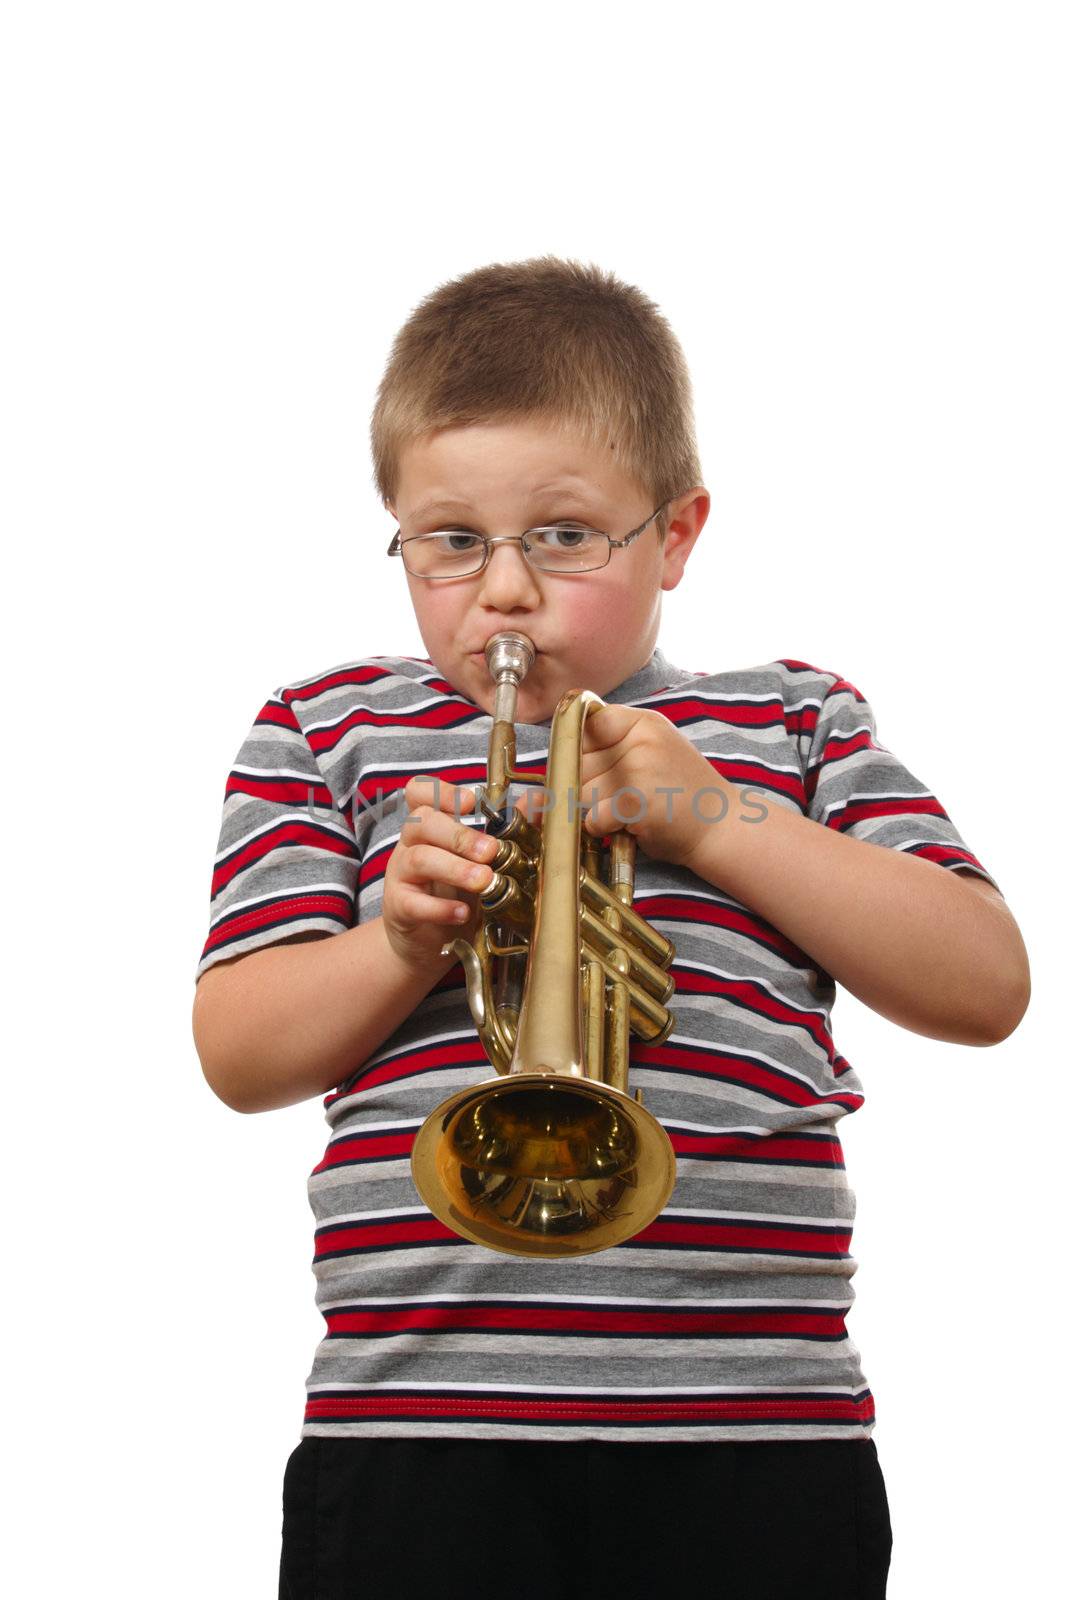 Boy Blowing Trumpet photo on the white background